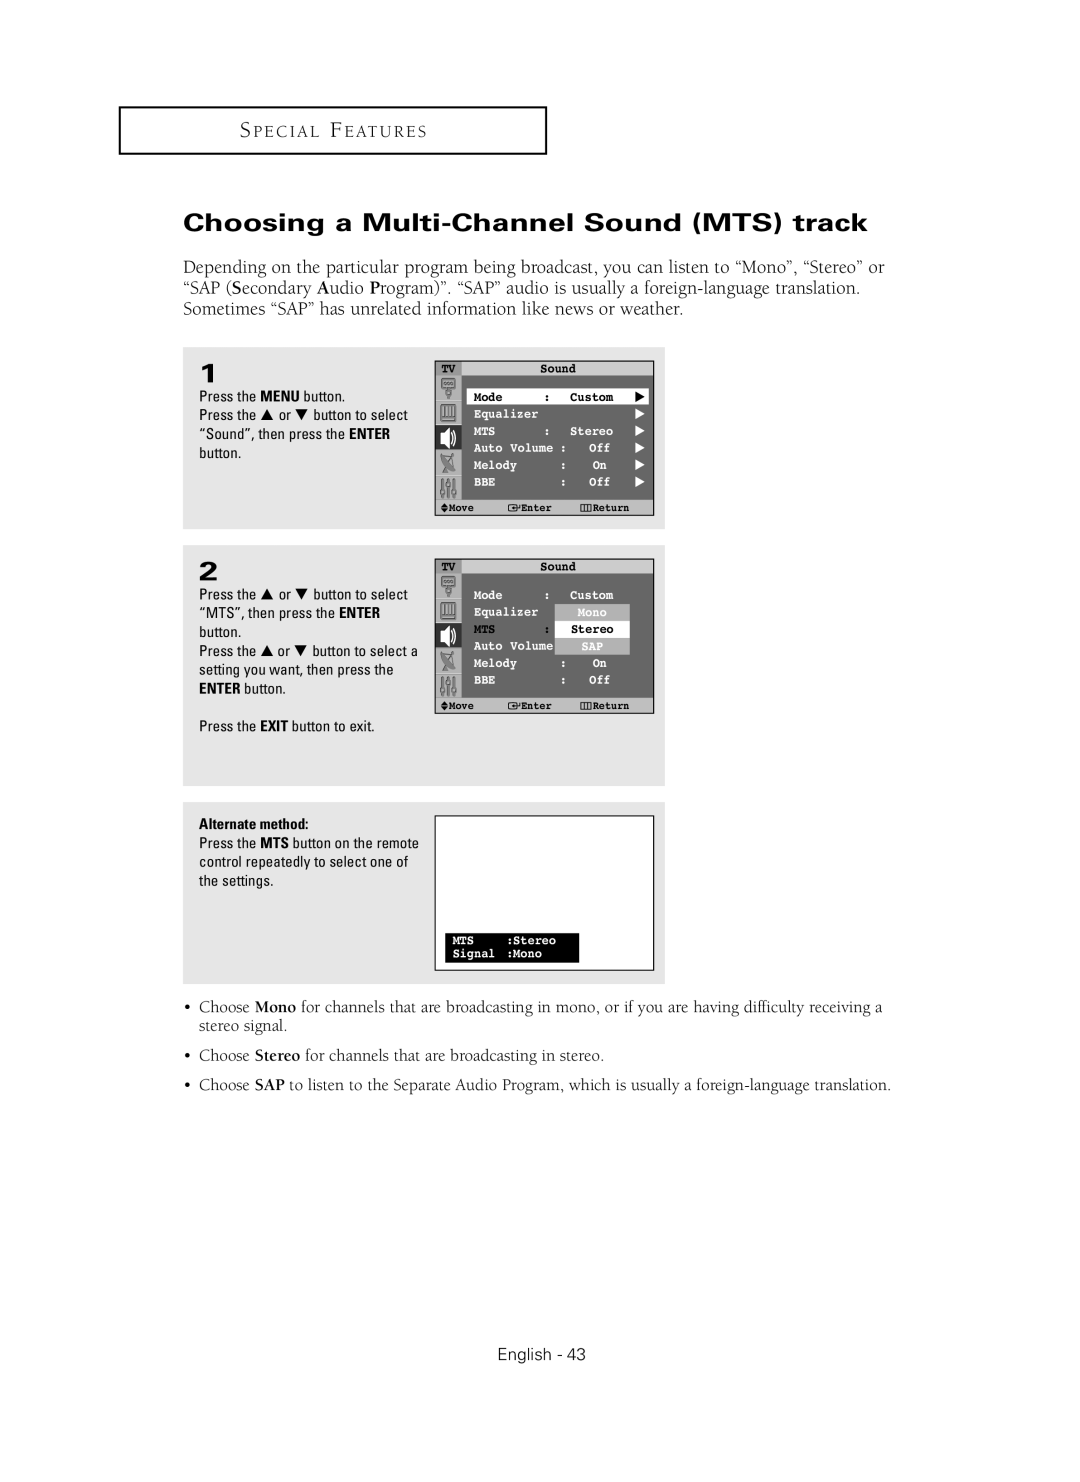 Samsung HC-P4241W Choosing a Multi-Channel Sound MTS track, Choose Stereo for channels that are broadcasting in stereo 